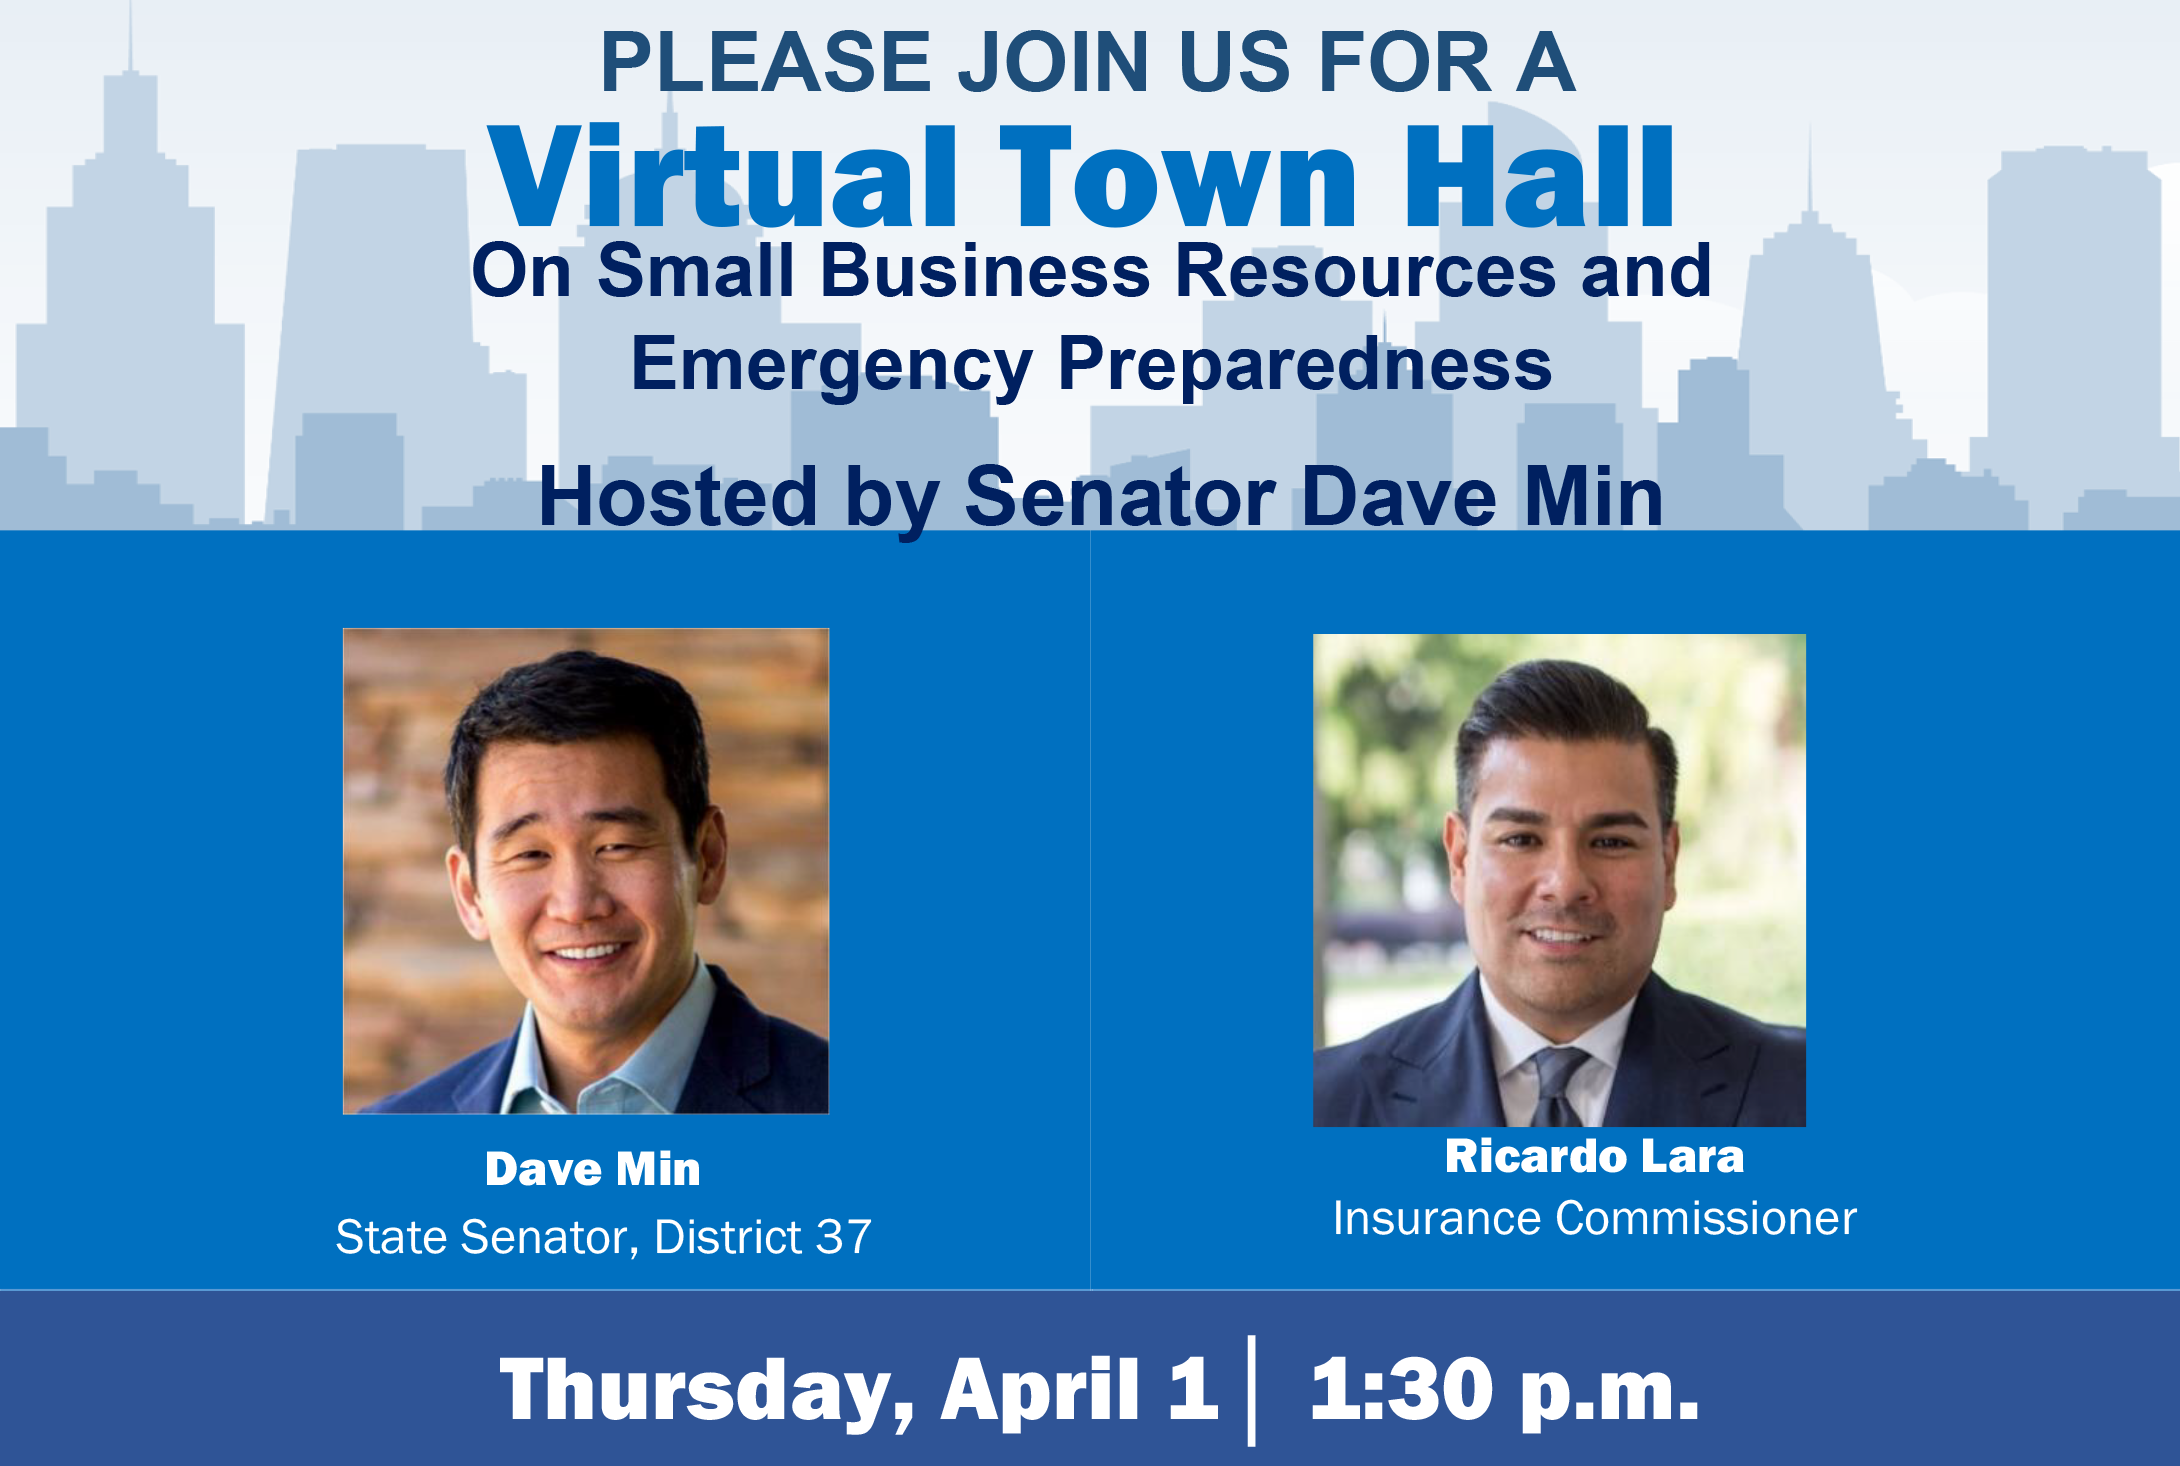 Please Join us for a Virtual Town Hall on small business resources and emergency preparedness hosted by senator Dave Min and guest, insurance commissioner Ricardo Lara on Thursday, April 1, 1:30 p.m.